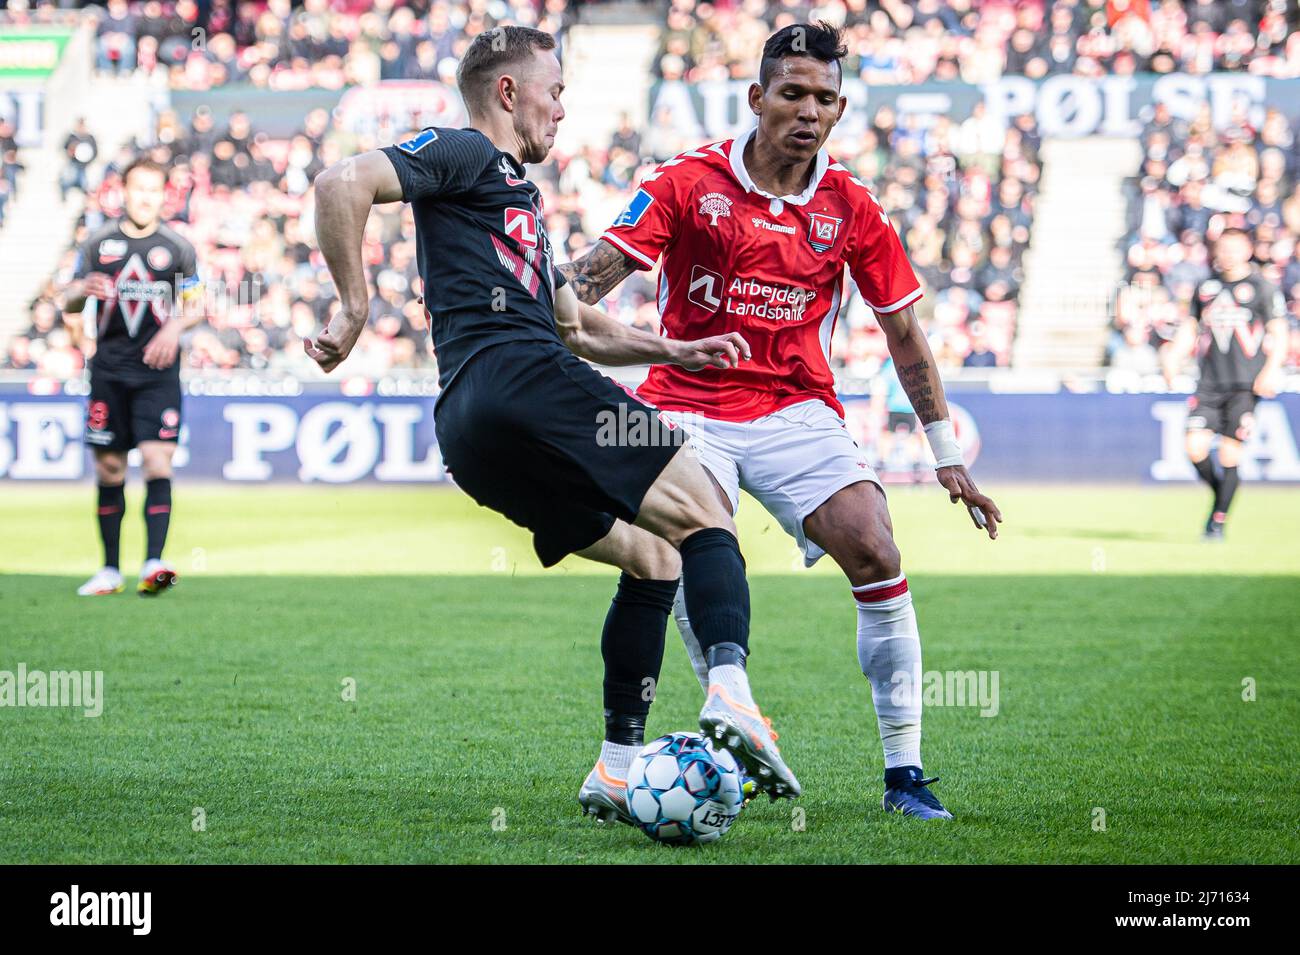 Herning, Denmark. 04th, May 2022. Joel Andersson (6) of FC Midtjylland and Andres Ponce (9) of Vejle Bodlklub seen during the Sydbank Cup match between FC Midtjylland and Vejle Boldklub at MCH Arena in Herning. (Photo credit: Gonzales Photo - Morten Kjaer). Stock Photo